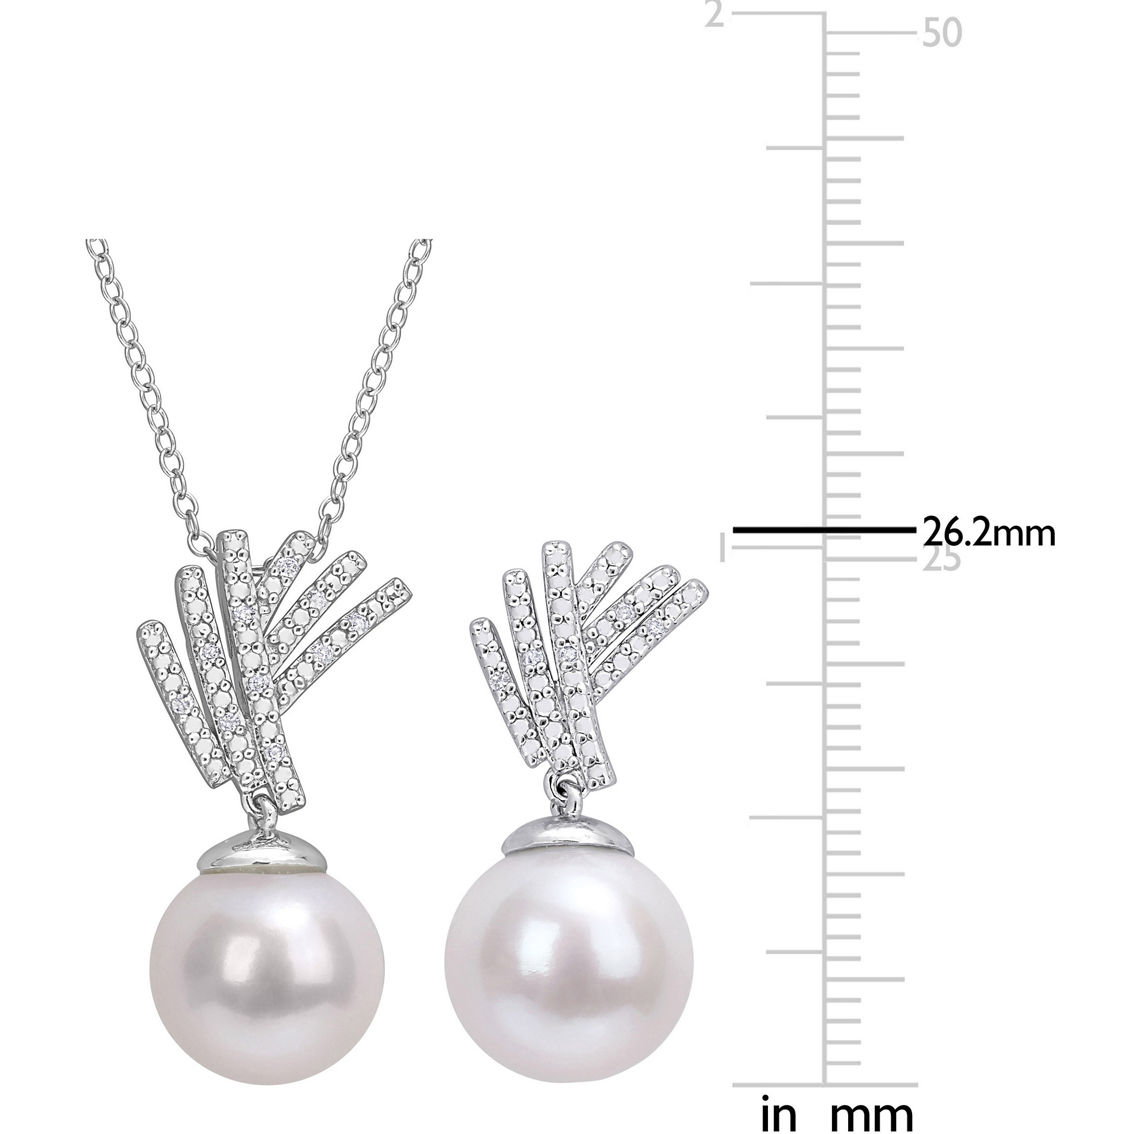 Sofia B. Cultured Freshwater Pearl Diamond Drop Necklace & Earrings 2 pc. Set - Image 4 of 4